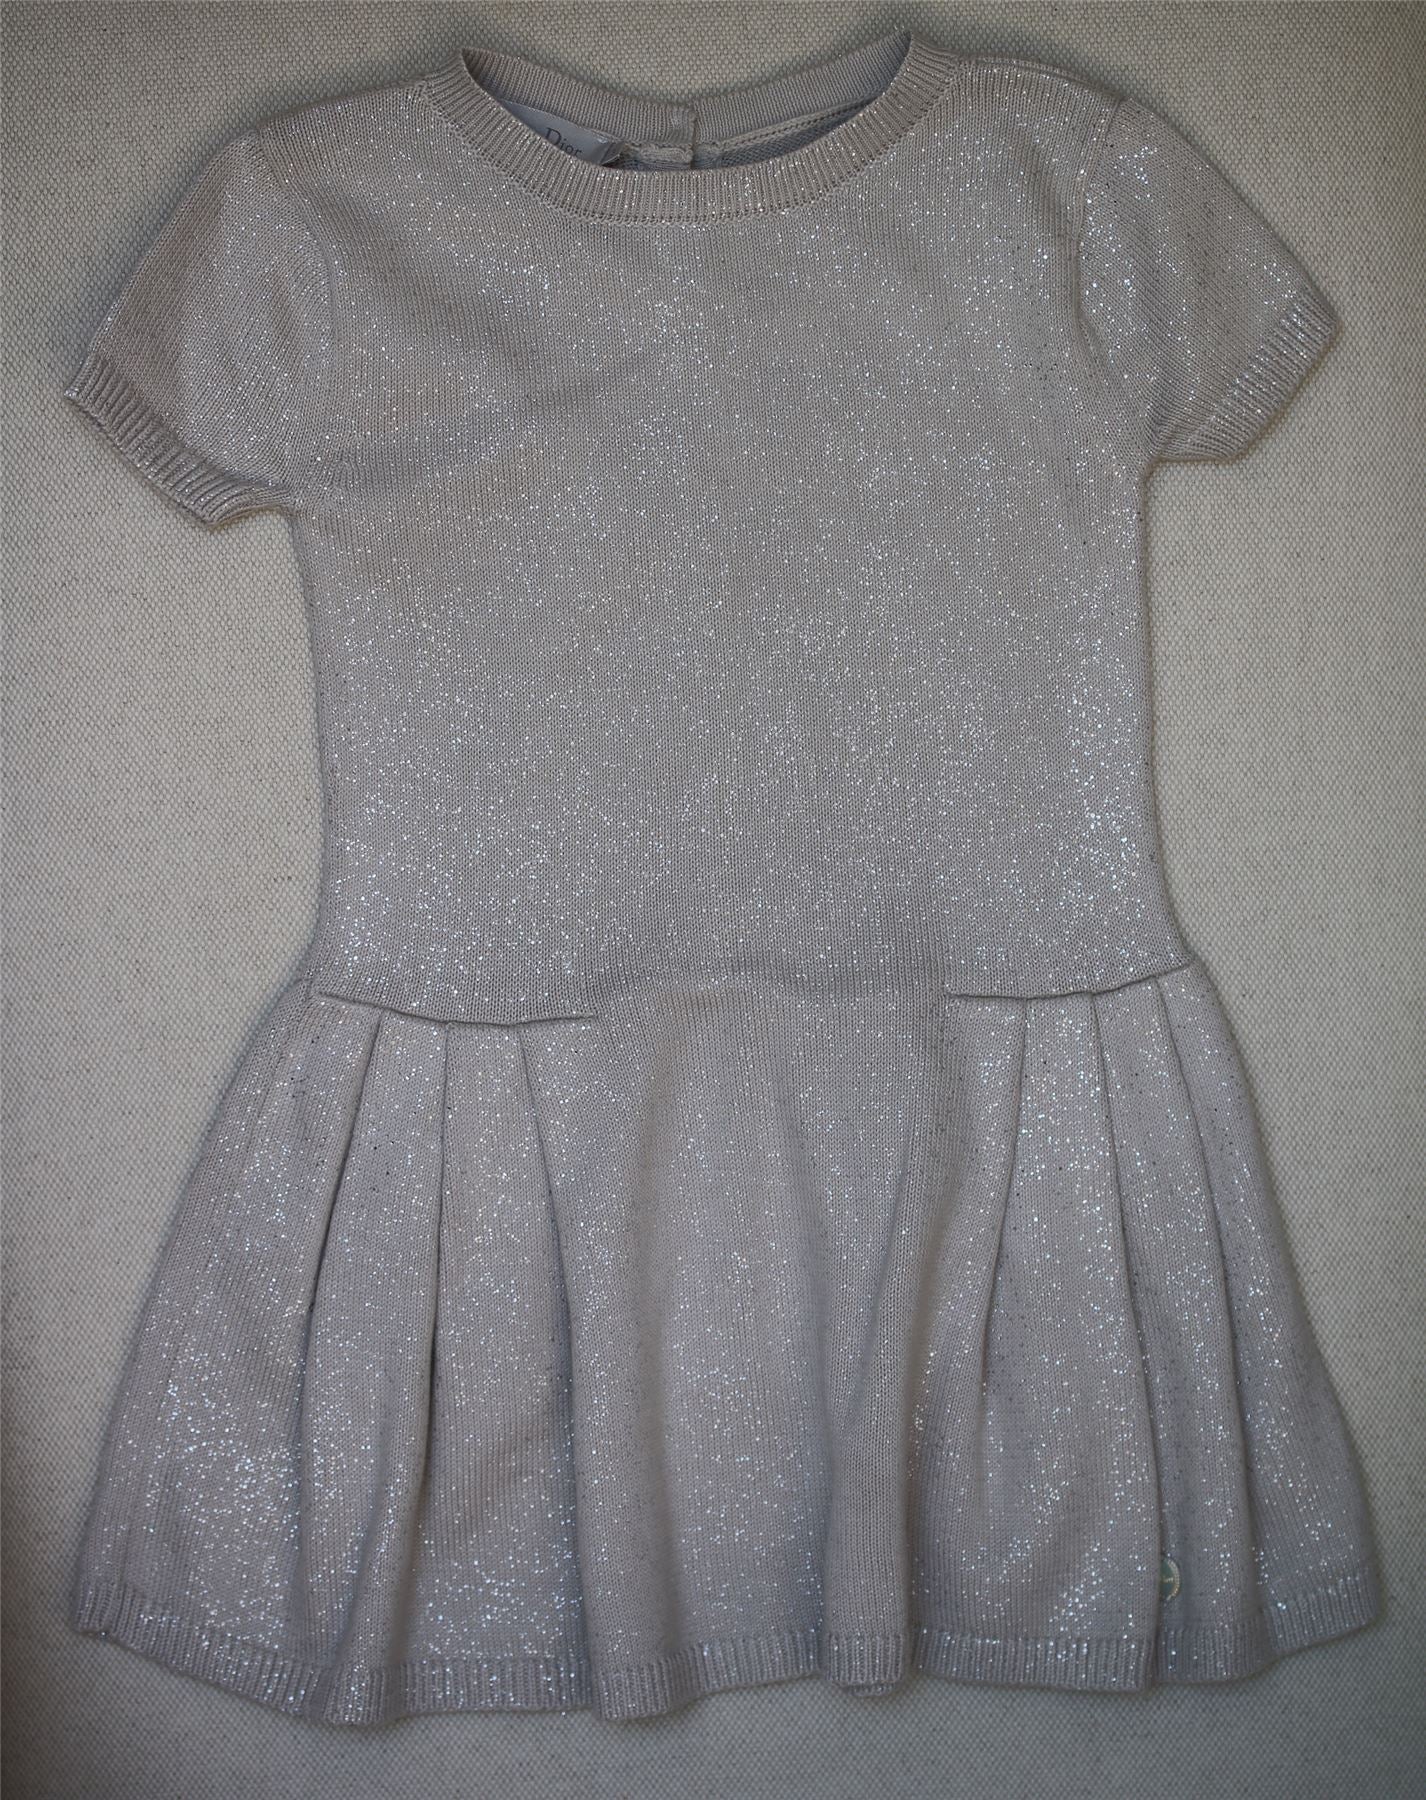 CHRISTIAN DIOR GIRLS CHAMPAGNE KNIT DRESS 3 YEARS